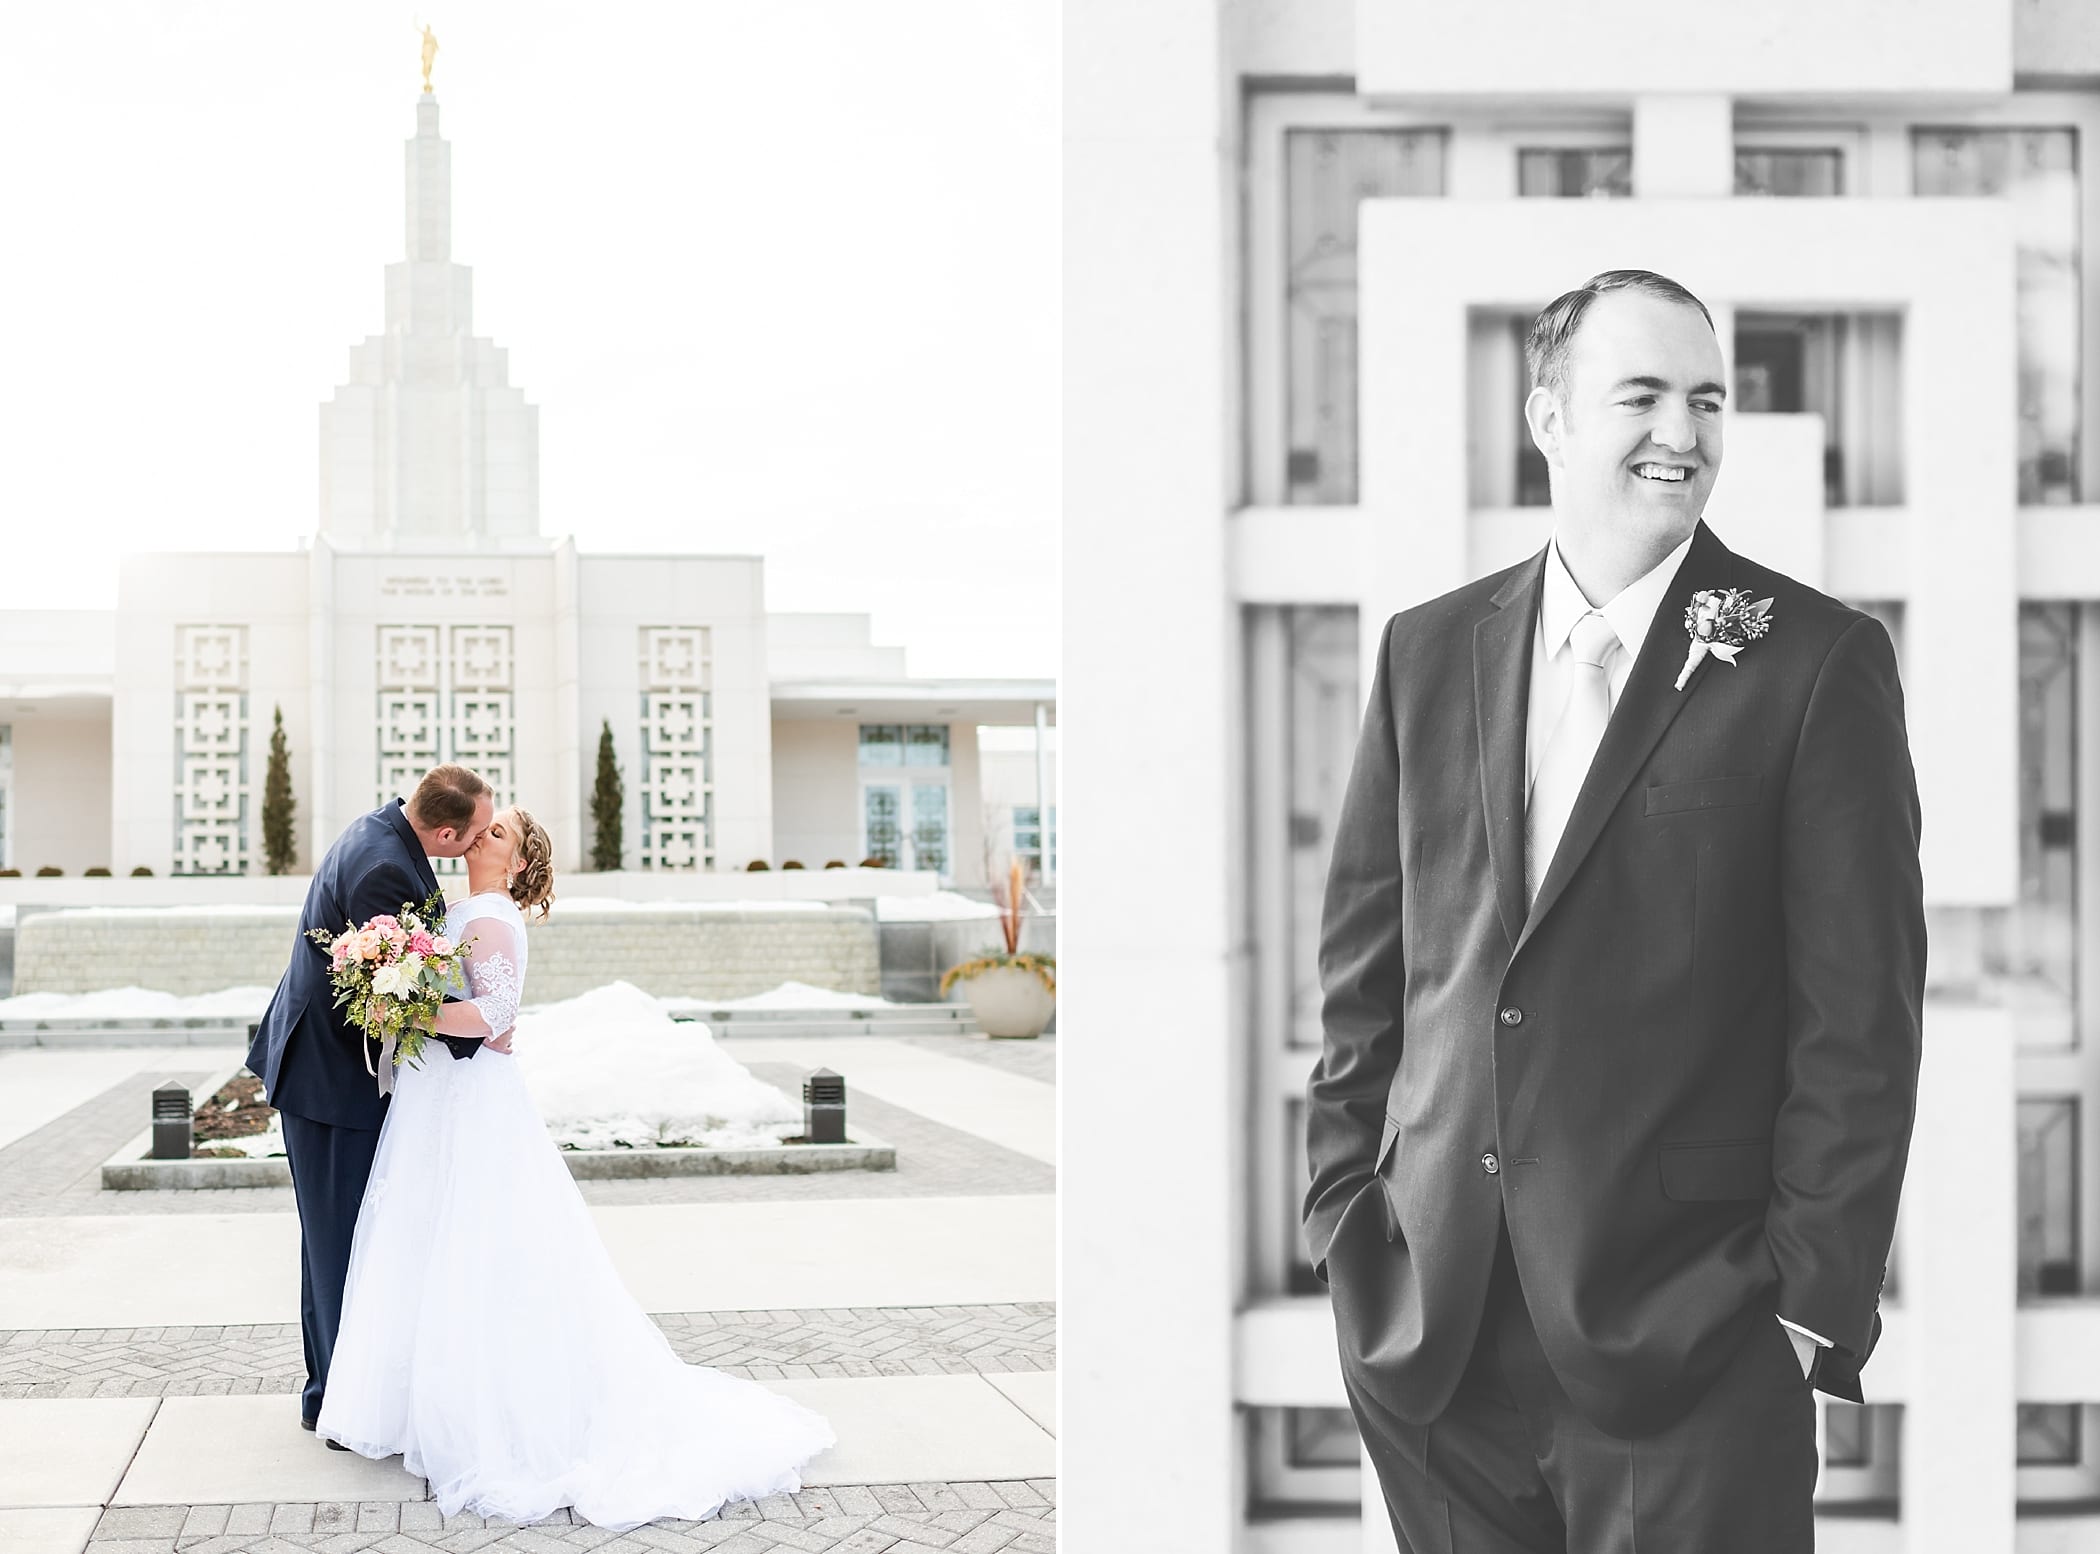 First look at the Idaho Falls Temple in Spring by Michelle & Logan